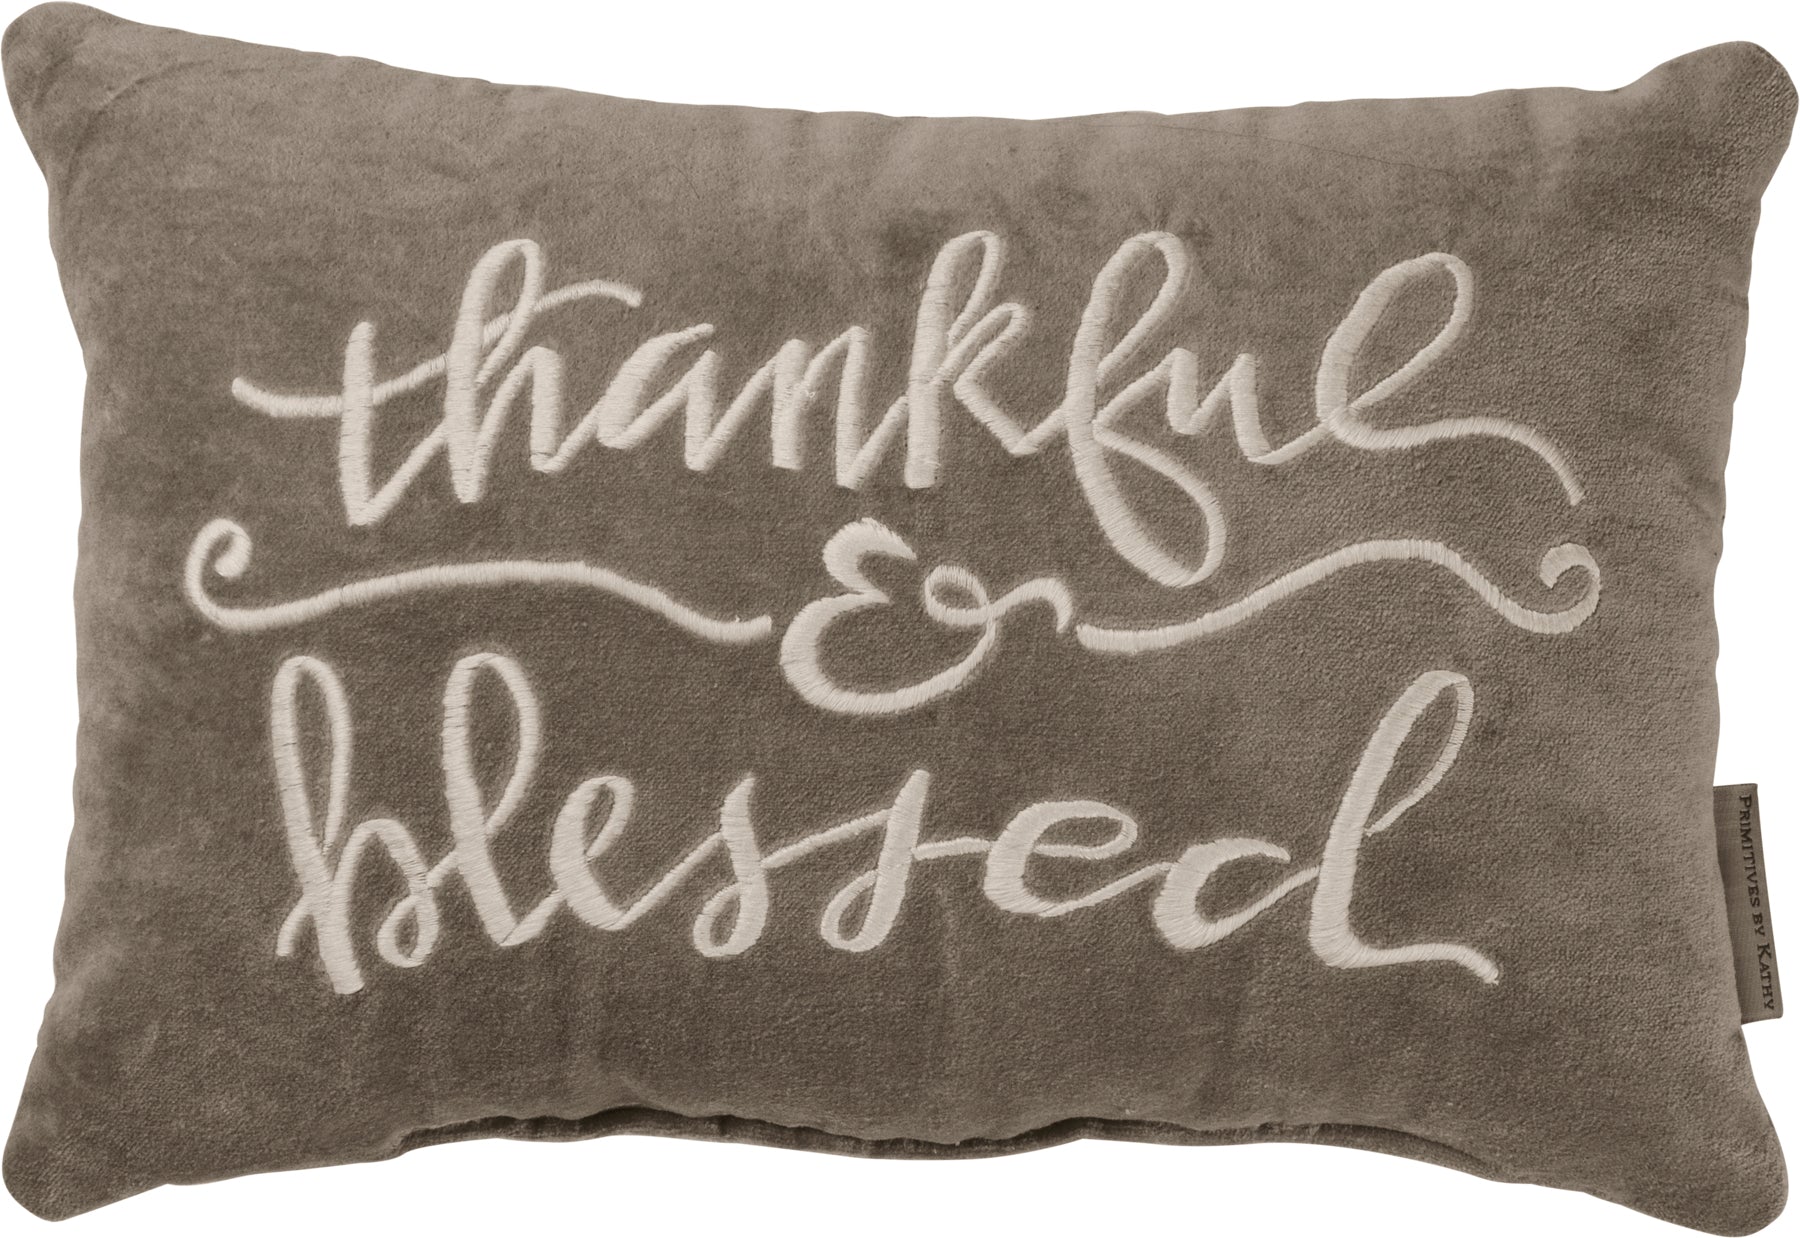 "Thankful & Blessed" Emroidered Pillow